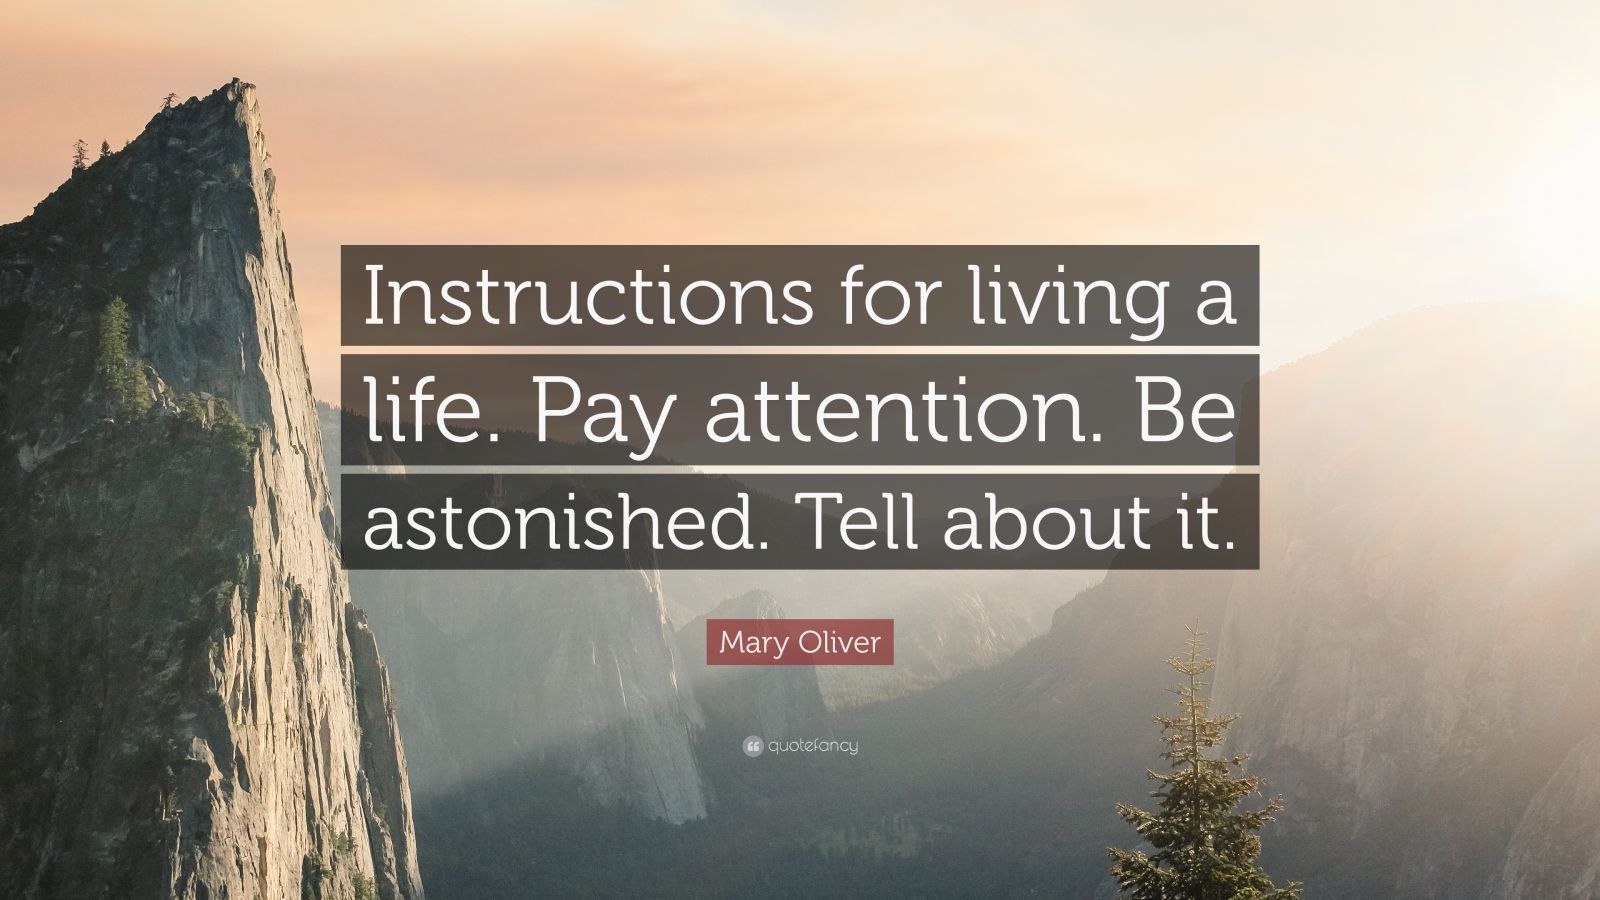 4706907 Mary Oliver Quote Instructions for living a life Pay attention Be